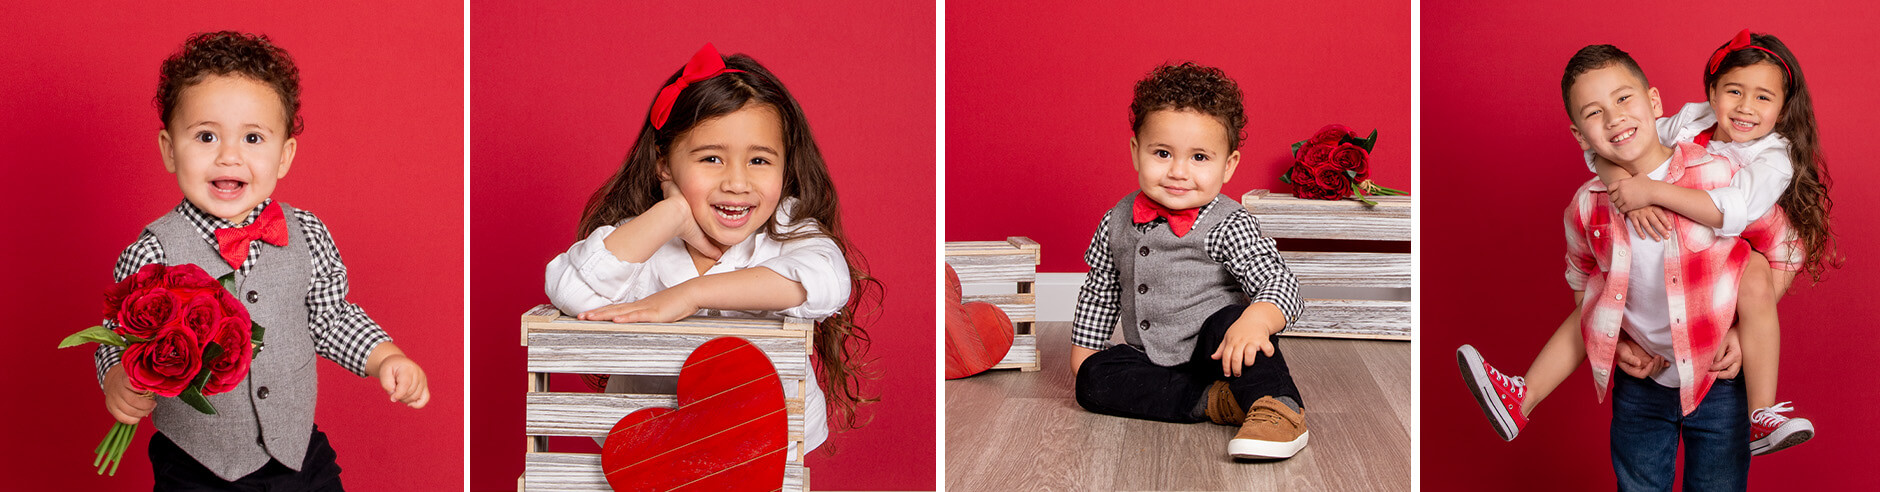 Feel the love with fun kids activities leading to Valentine’s Day